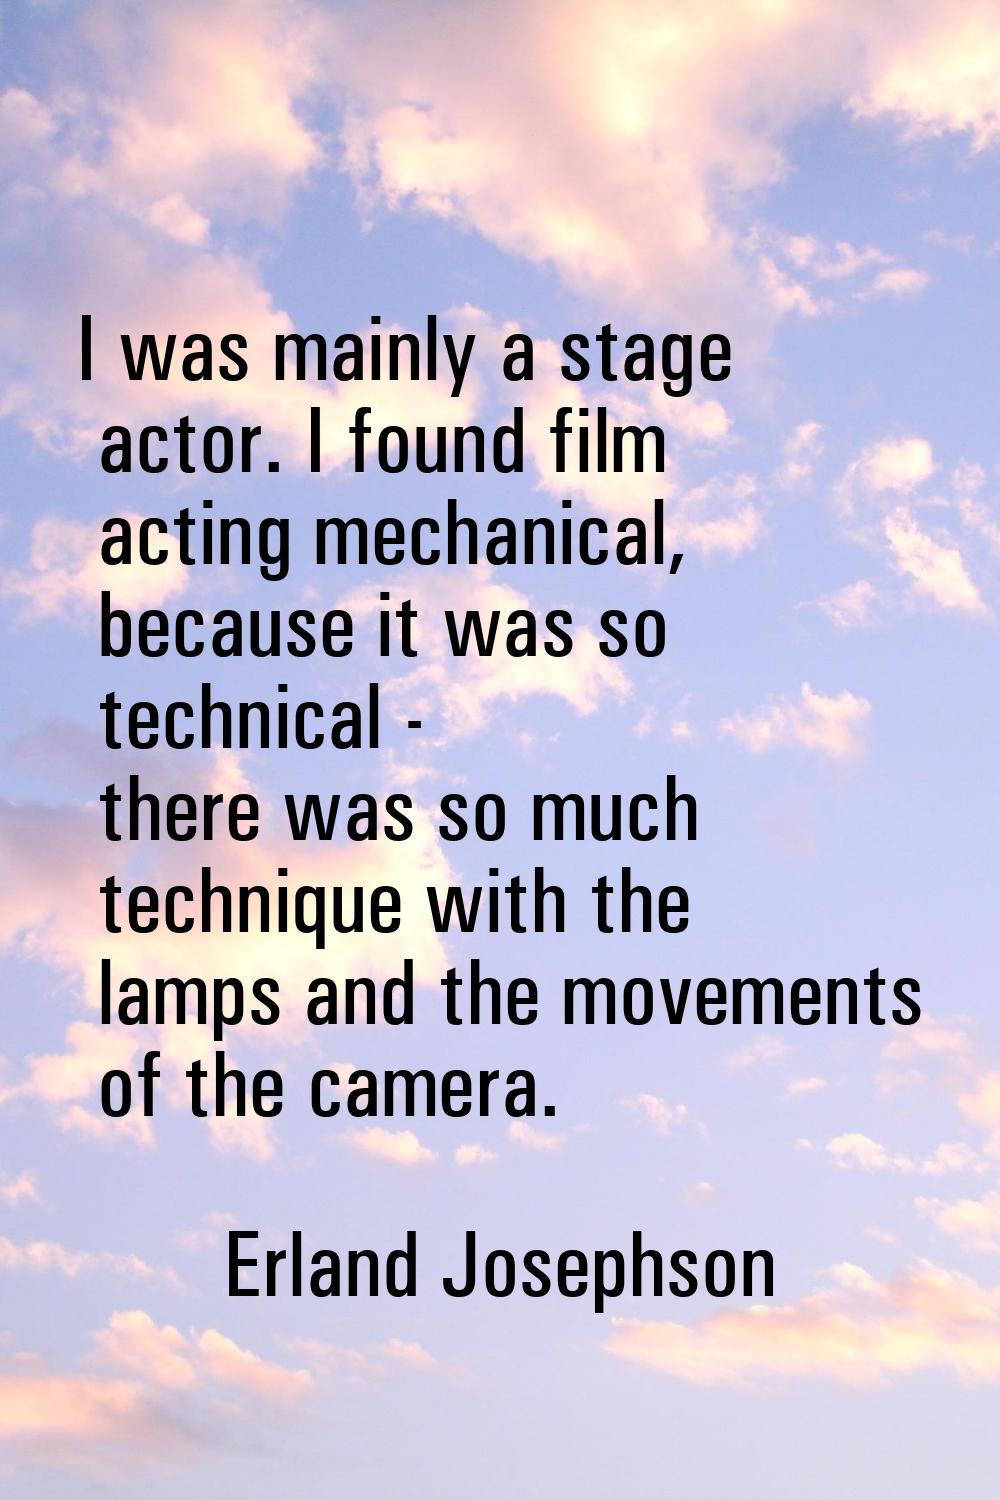 I was mainly a stage actor. I found film acting mechanical, because it was so technical - there was